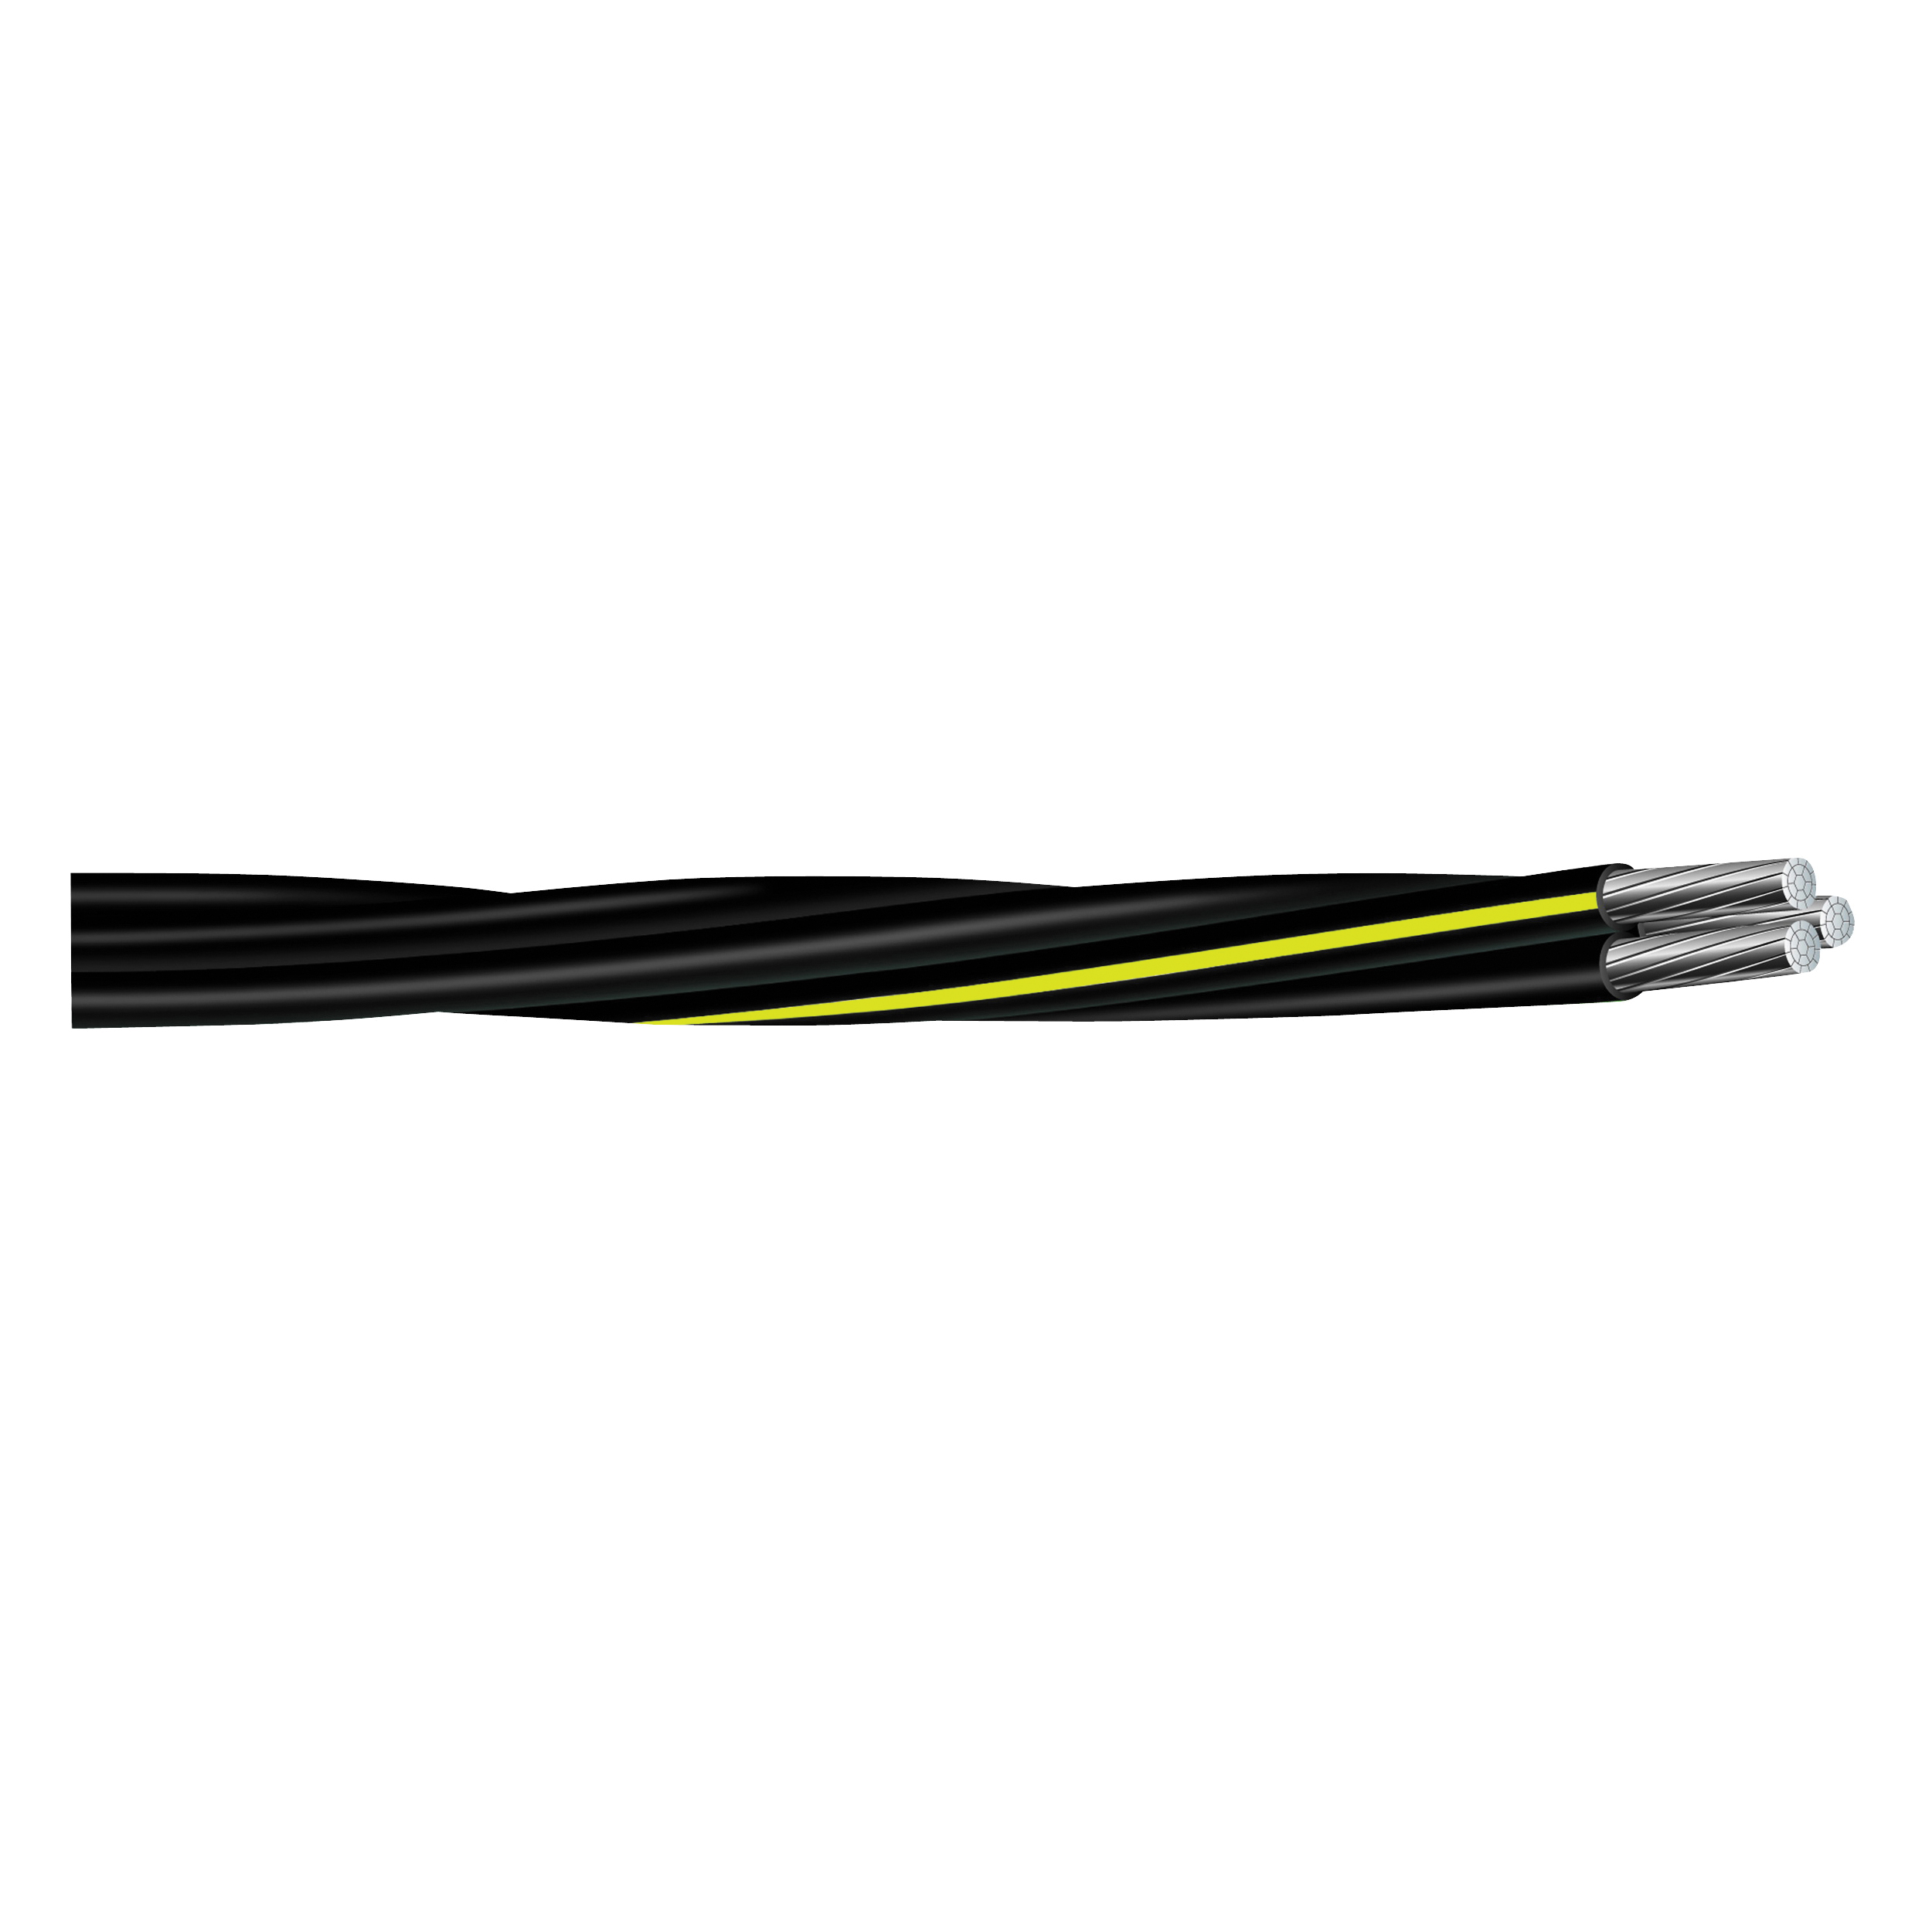 4/0 4/0 2/0 URD Building Wire, #4/0 AWG Wire, 3 -Conductor, 500 ft L, Aluminum Conductor, Yellow Sheath